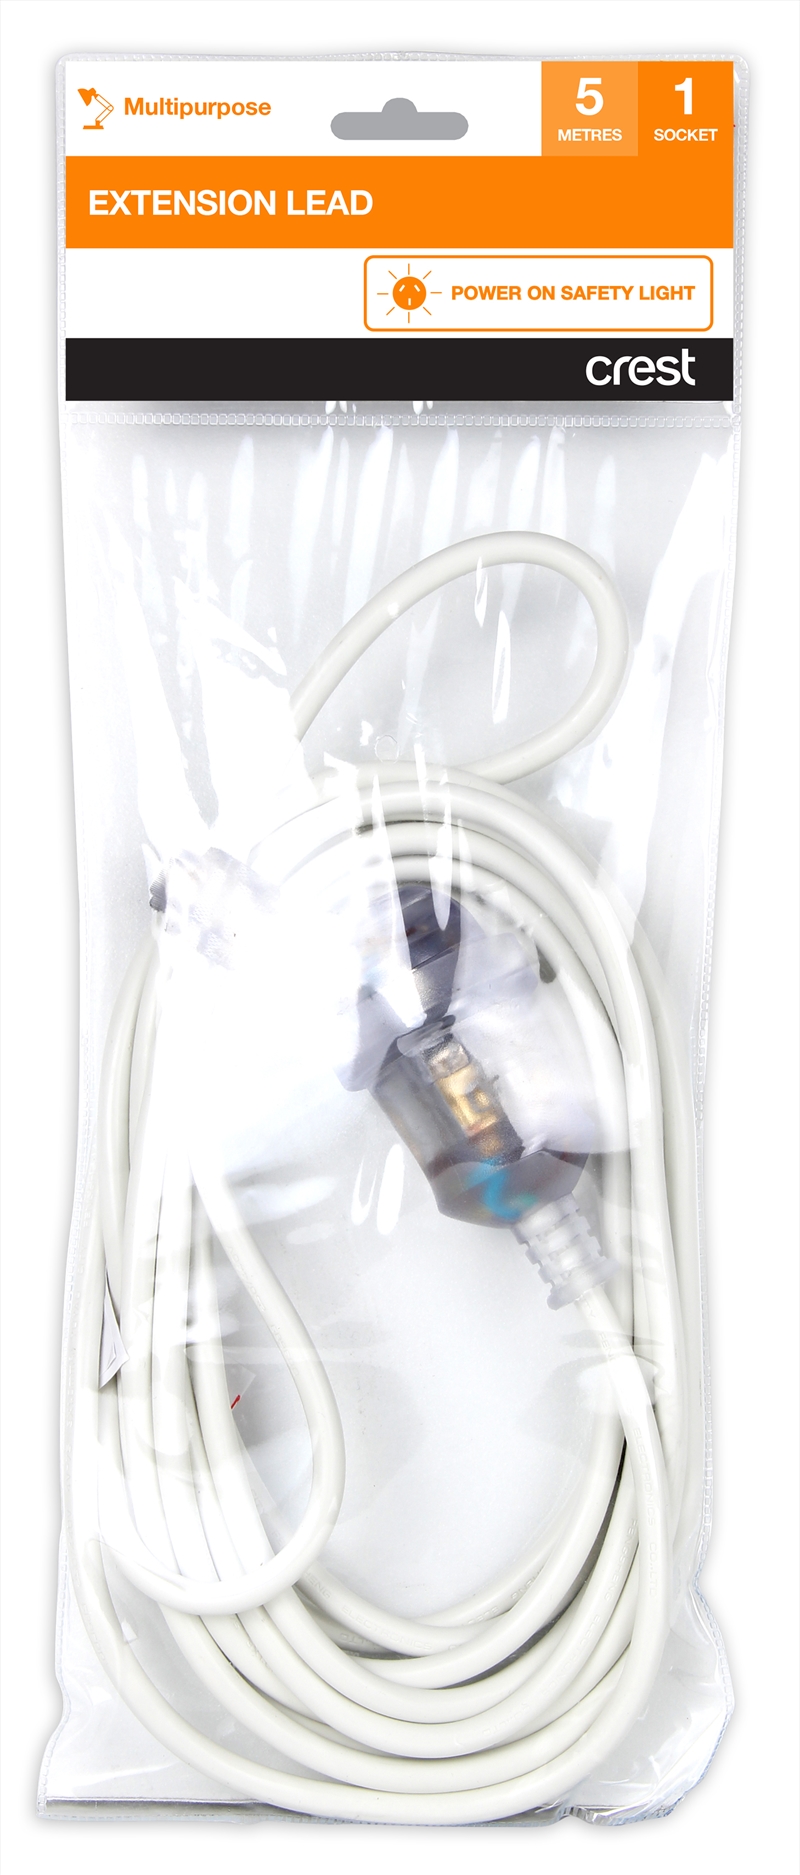 Crest Extension Lead With Built-In Light - 5M/Product Detail/Cables